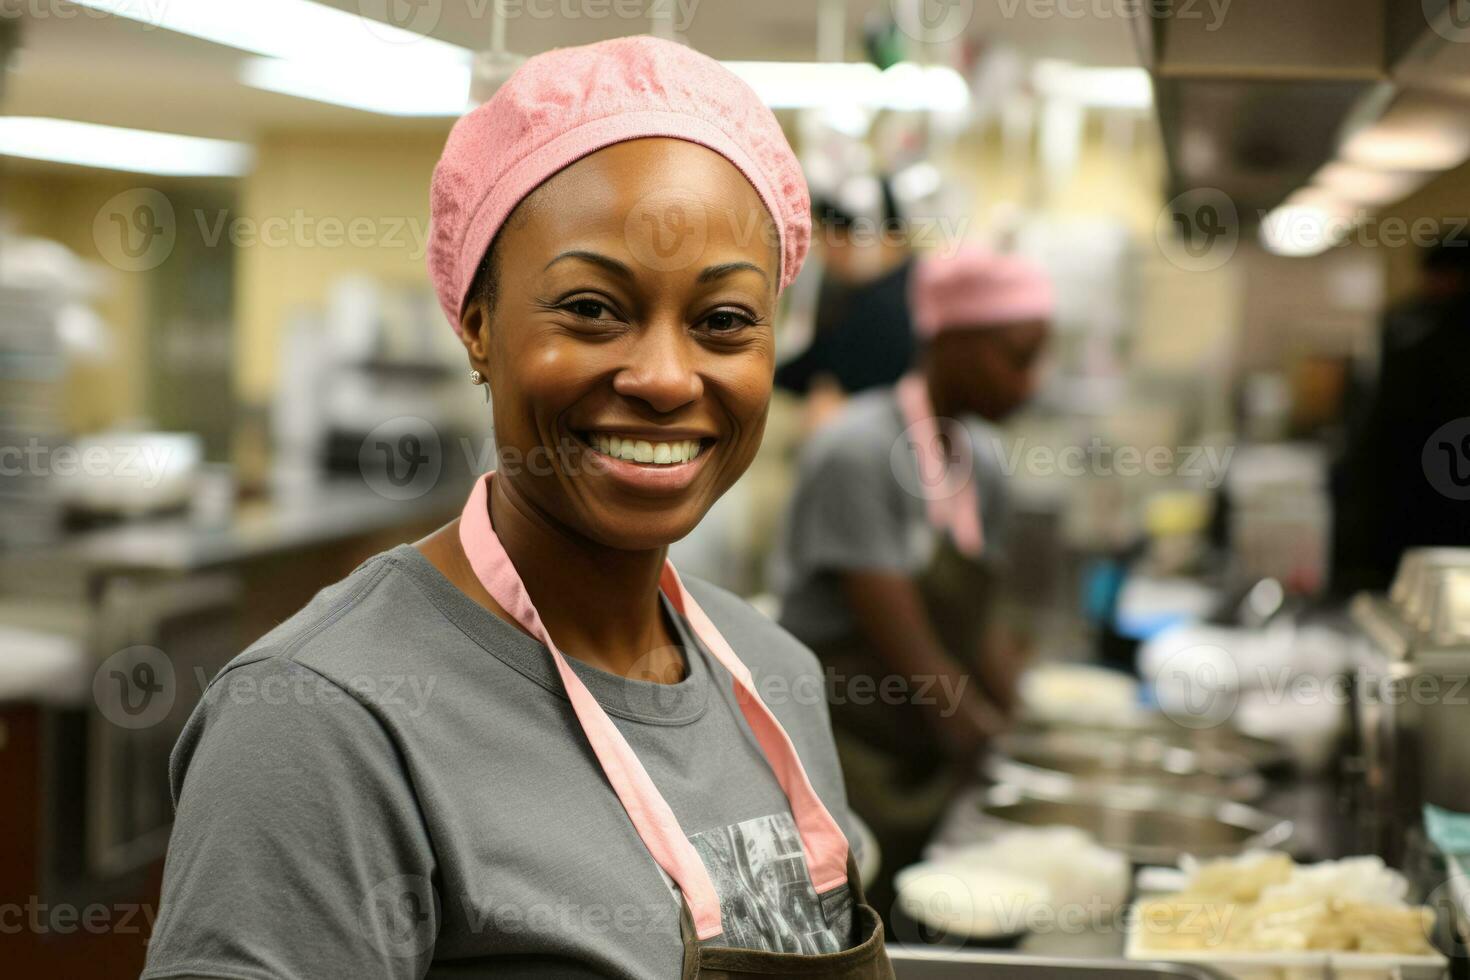 Cancer patient empowering others through selfless community service amidst treatment photo